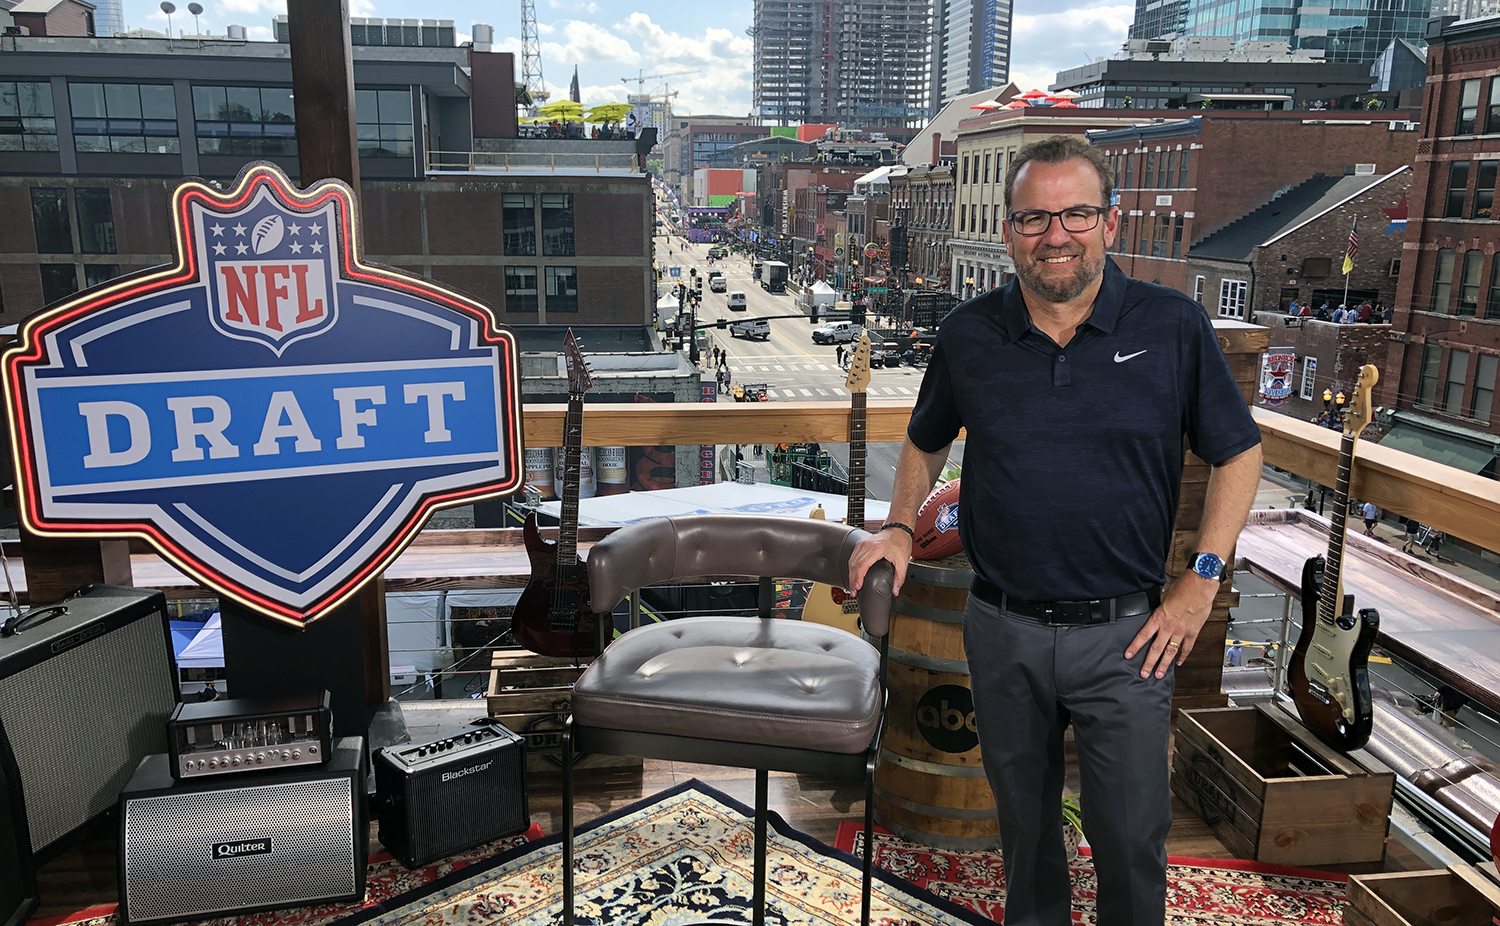 Live From the NFL Draft: Q&A – ESPN's Seth Markman on Differentiating the  ABC and ESPN Telecasts